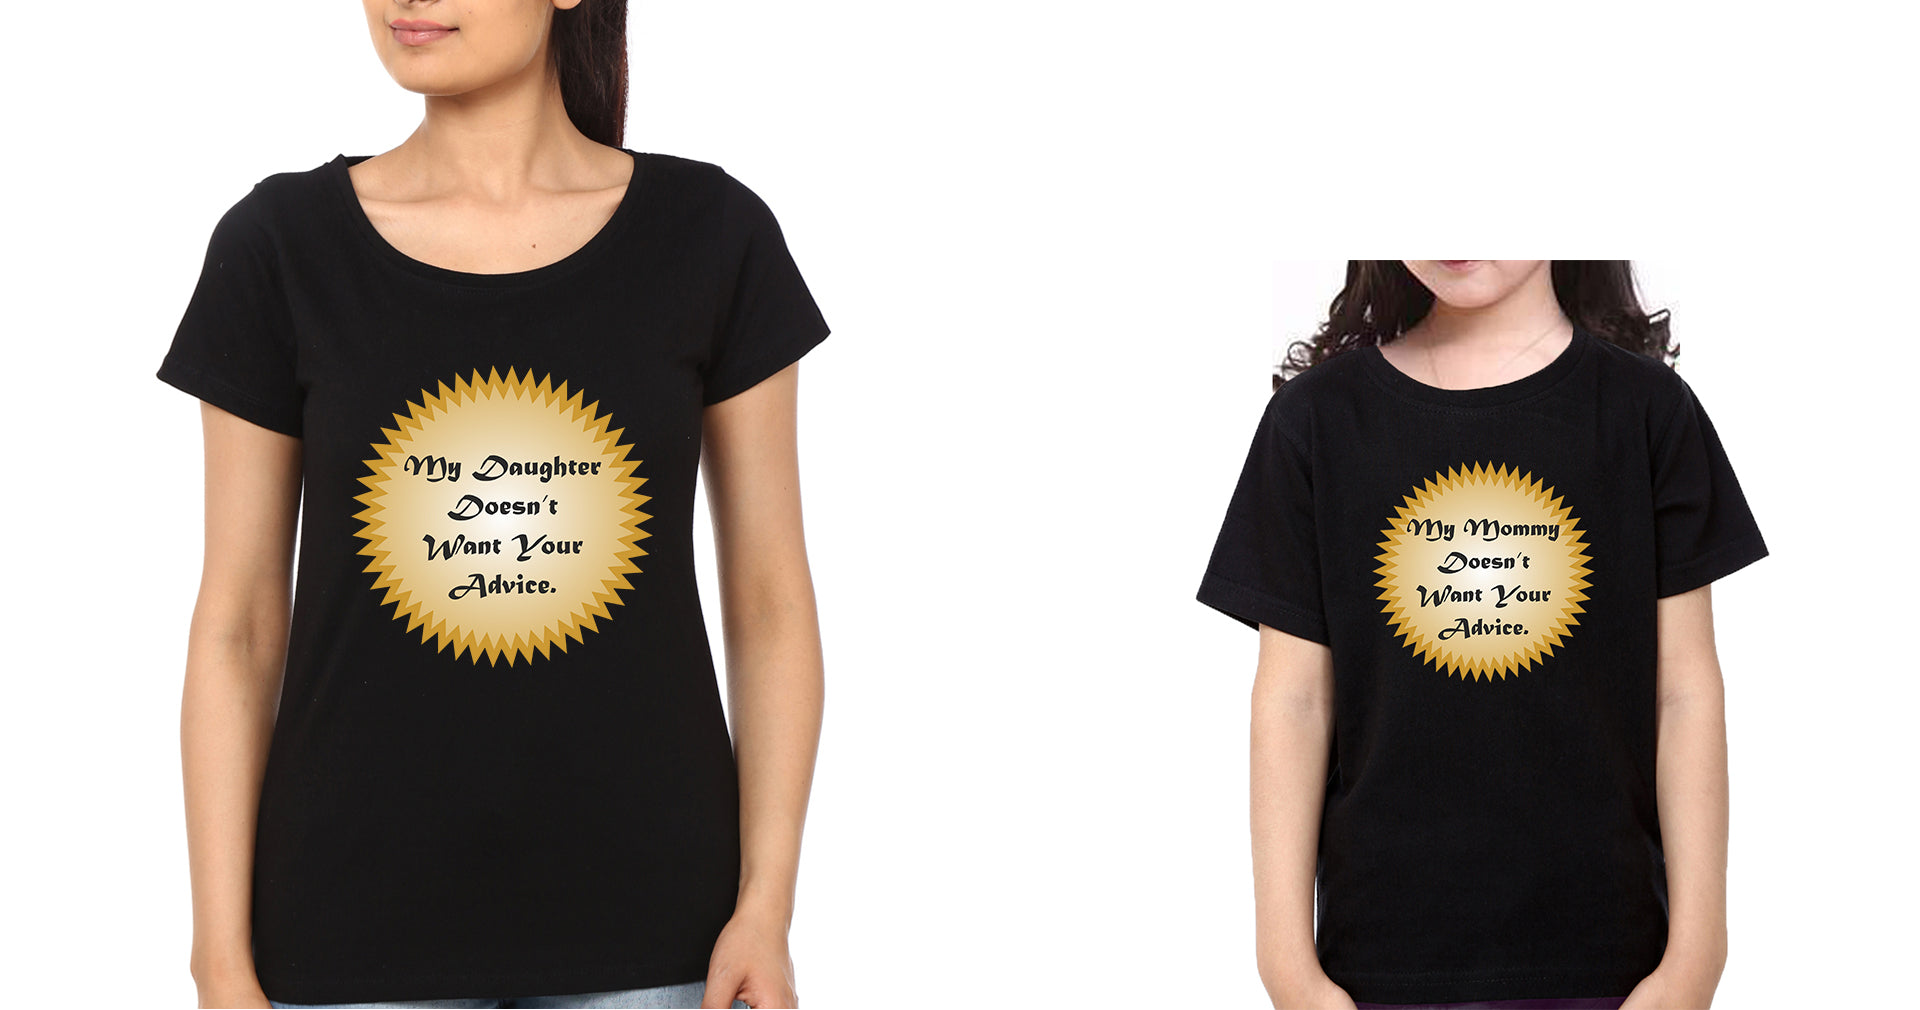 My Daughter Doesn't Want Your Advice My Mommy Doesn't Want Your Advice Mother and Daughter Matching T-Shirt- FunkyTradition